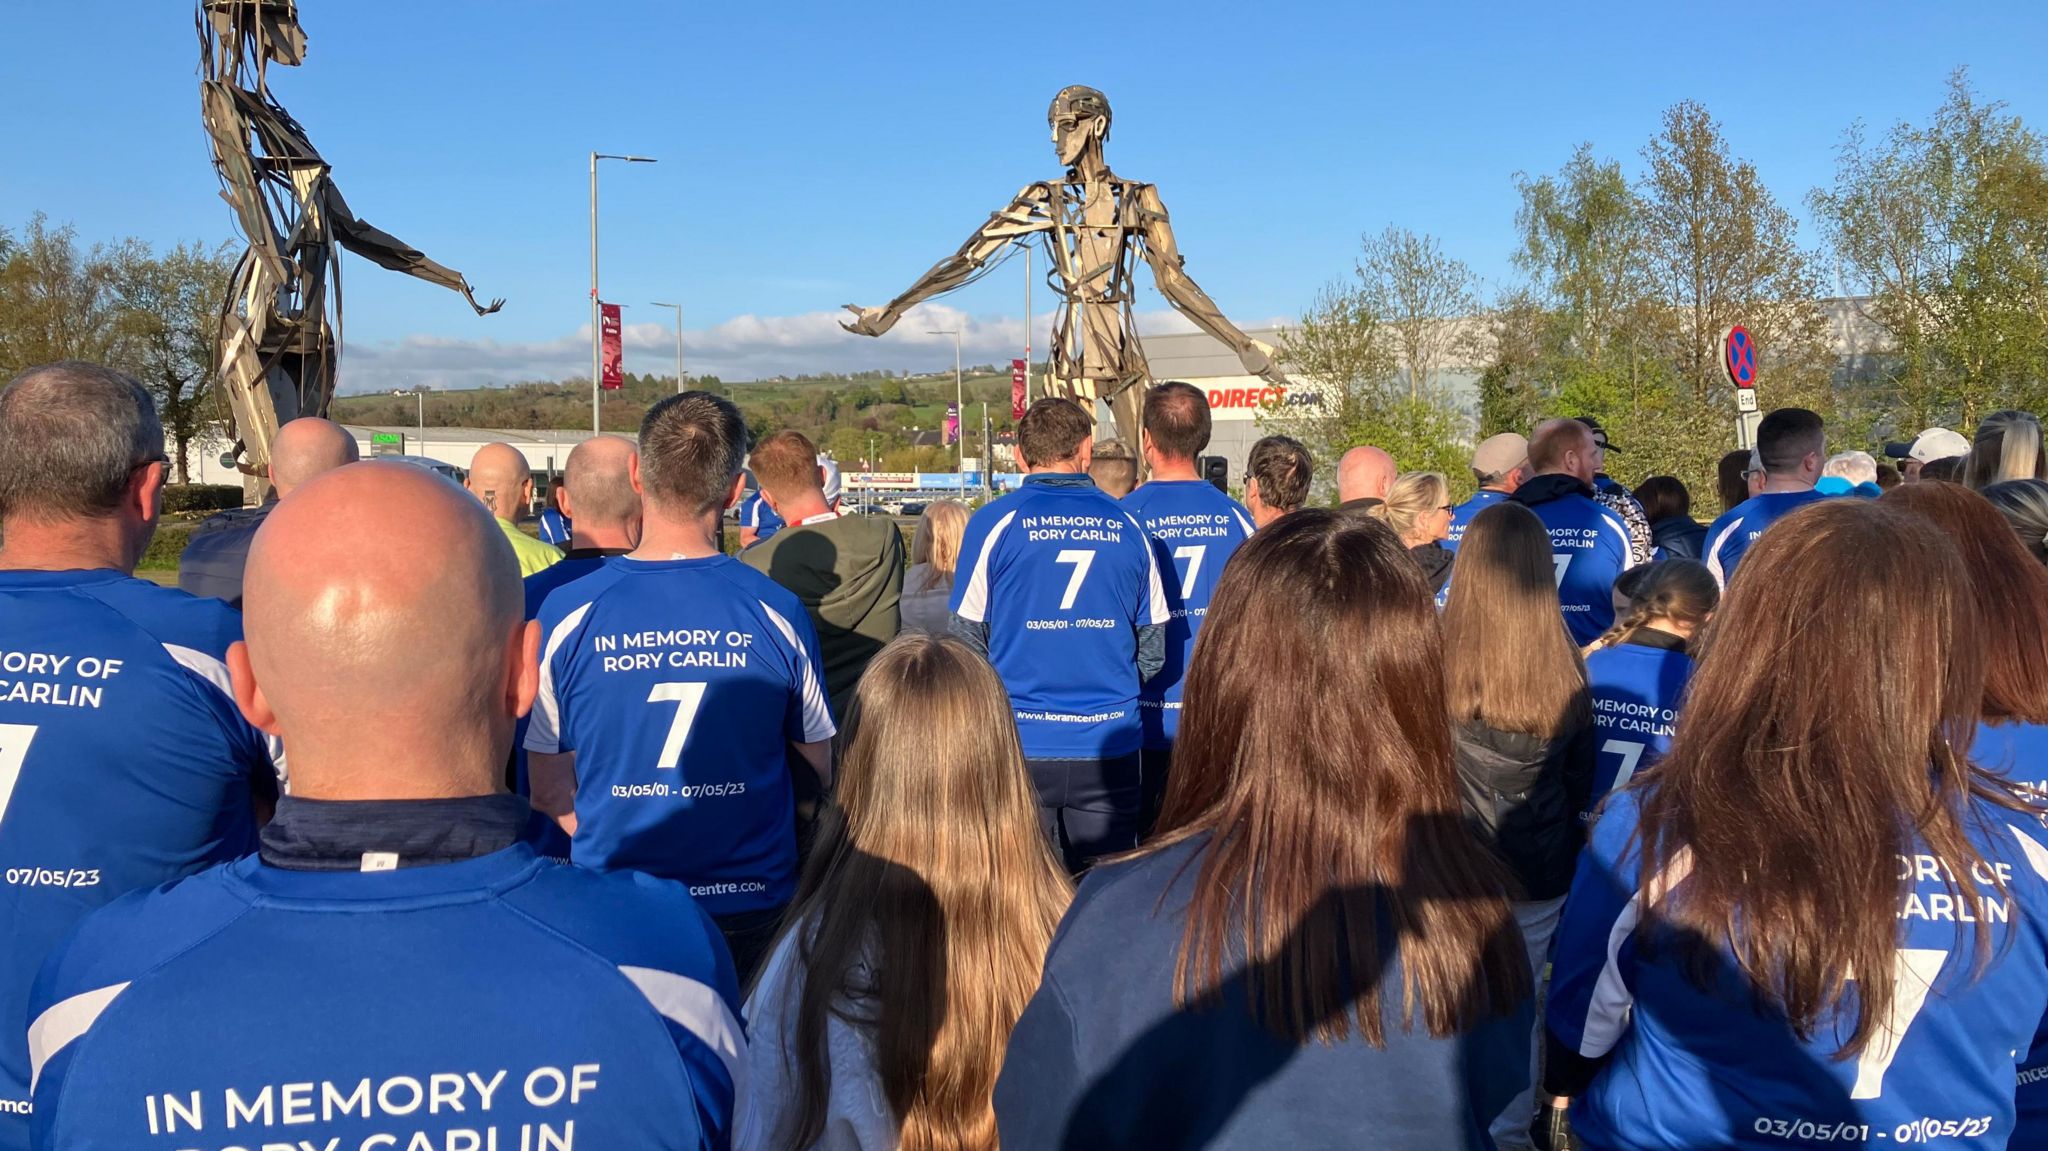 Dozens of people with their backs to the camera, wearing football shirts that say "In memory of Rory Carlin" on the back